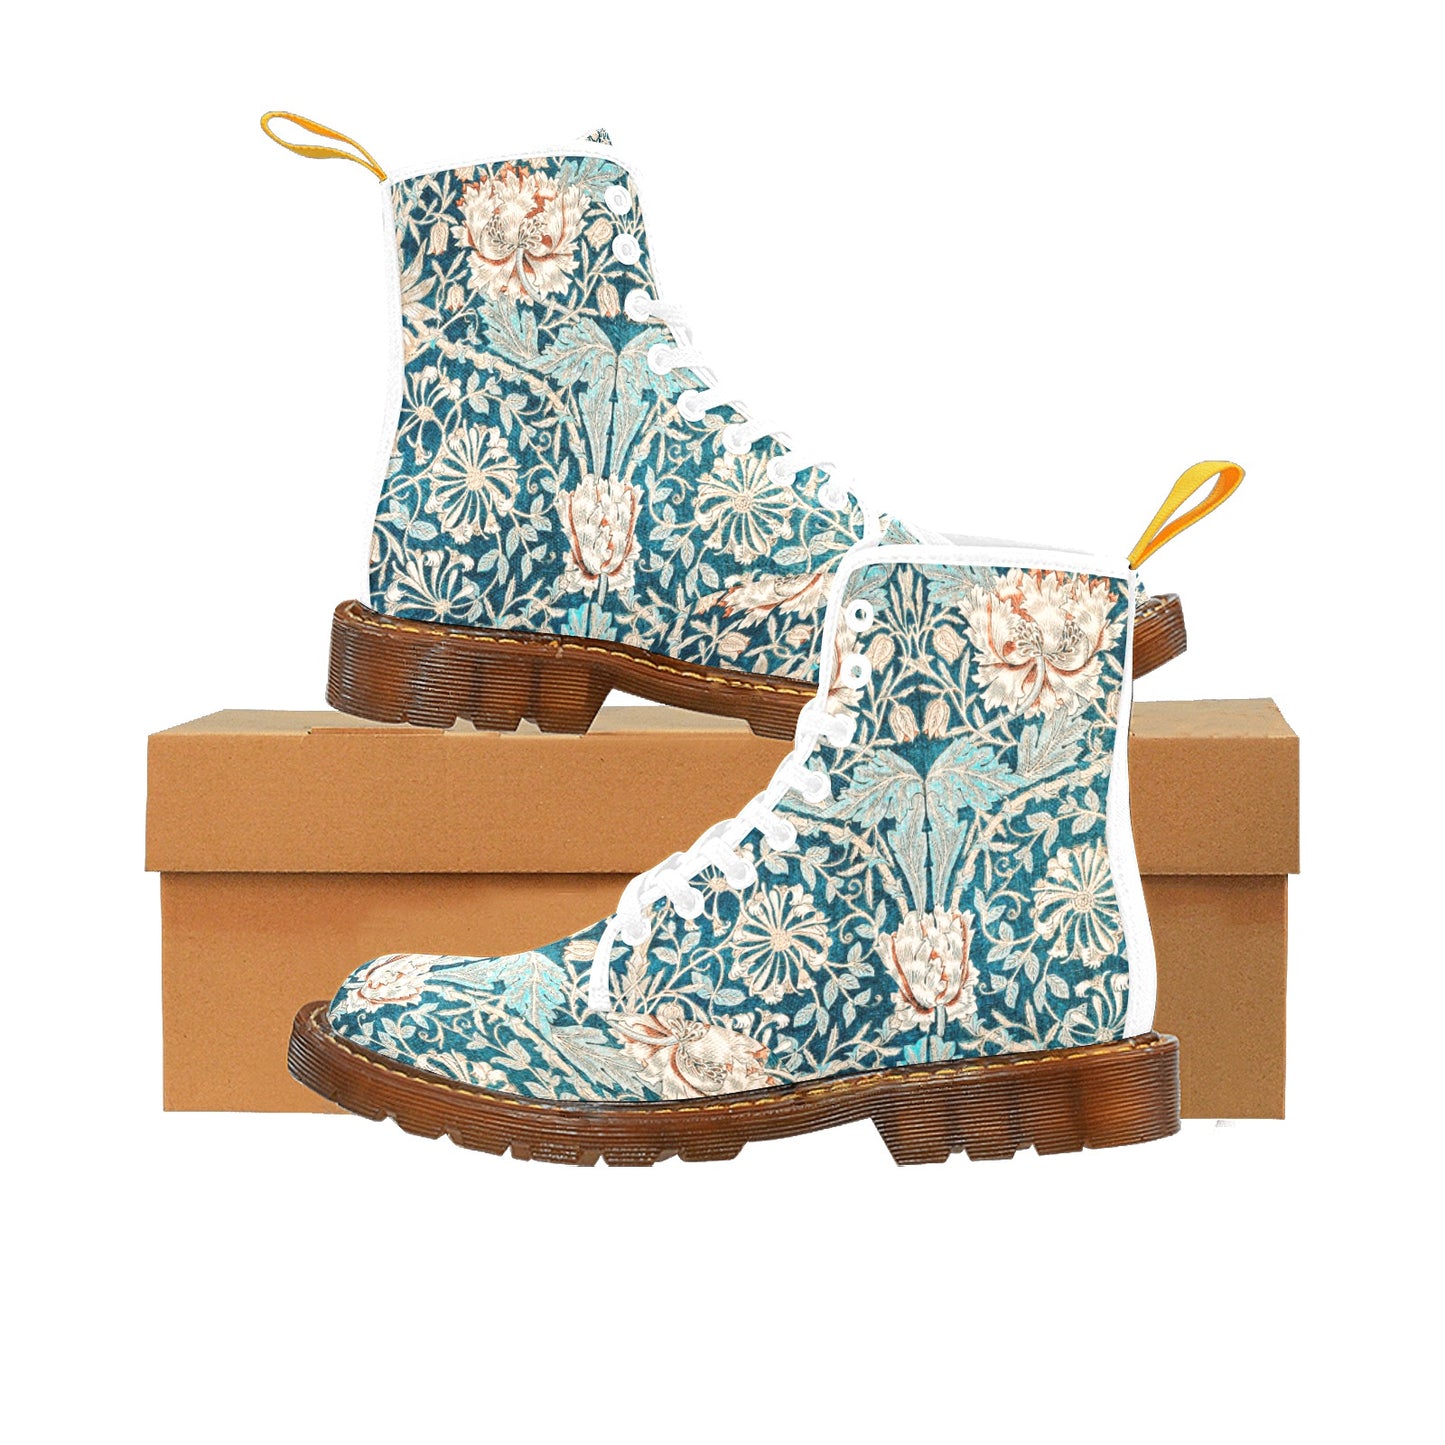 Women’s Flowered Canvas Boots with Hyacinth William Morris Wallpaper Design — Special Edition Yellow Pull Tab